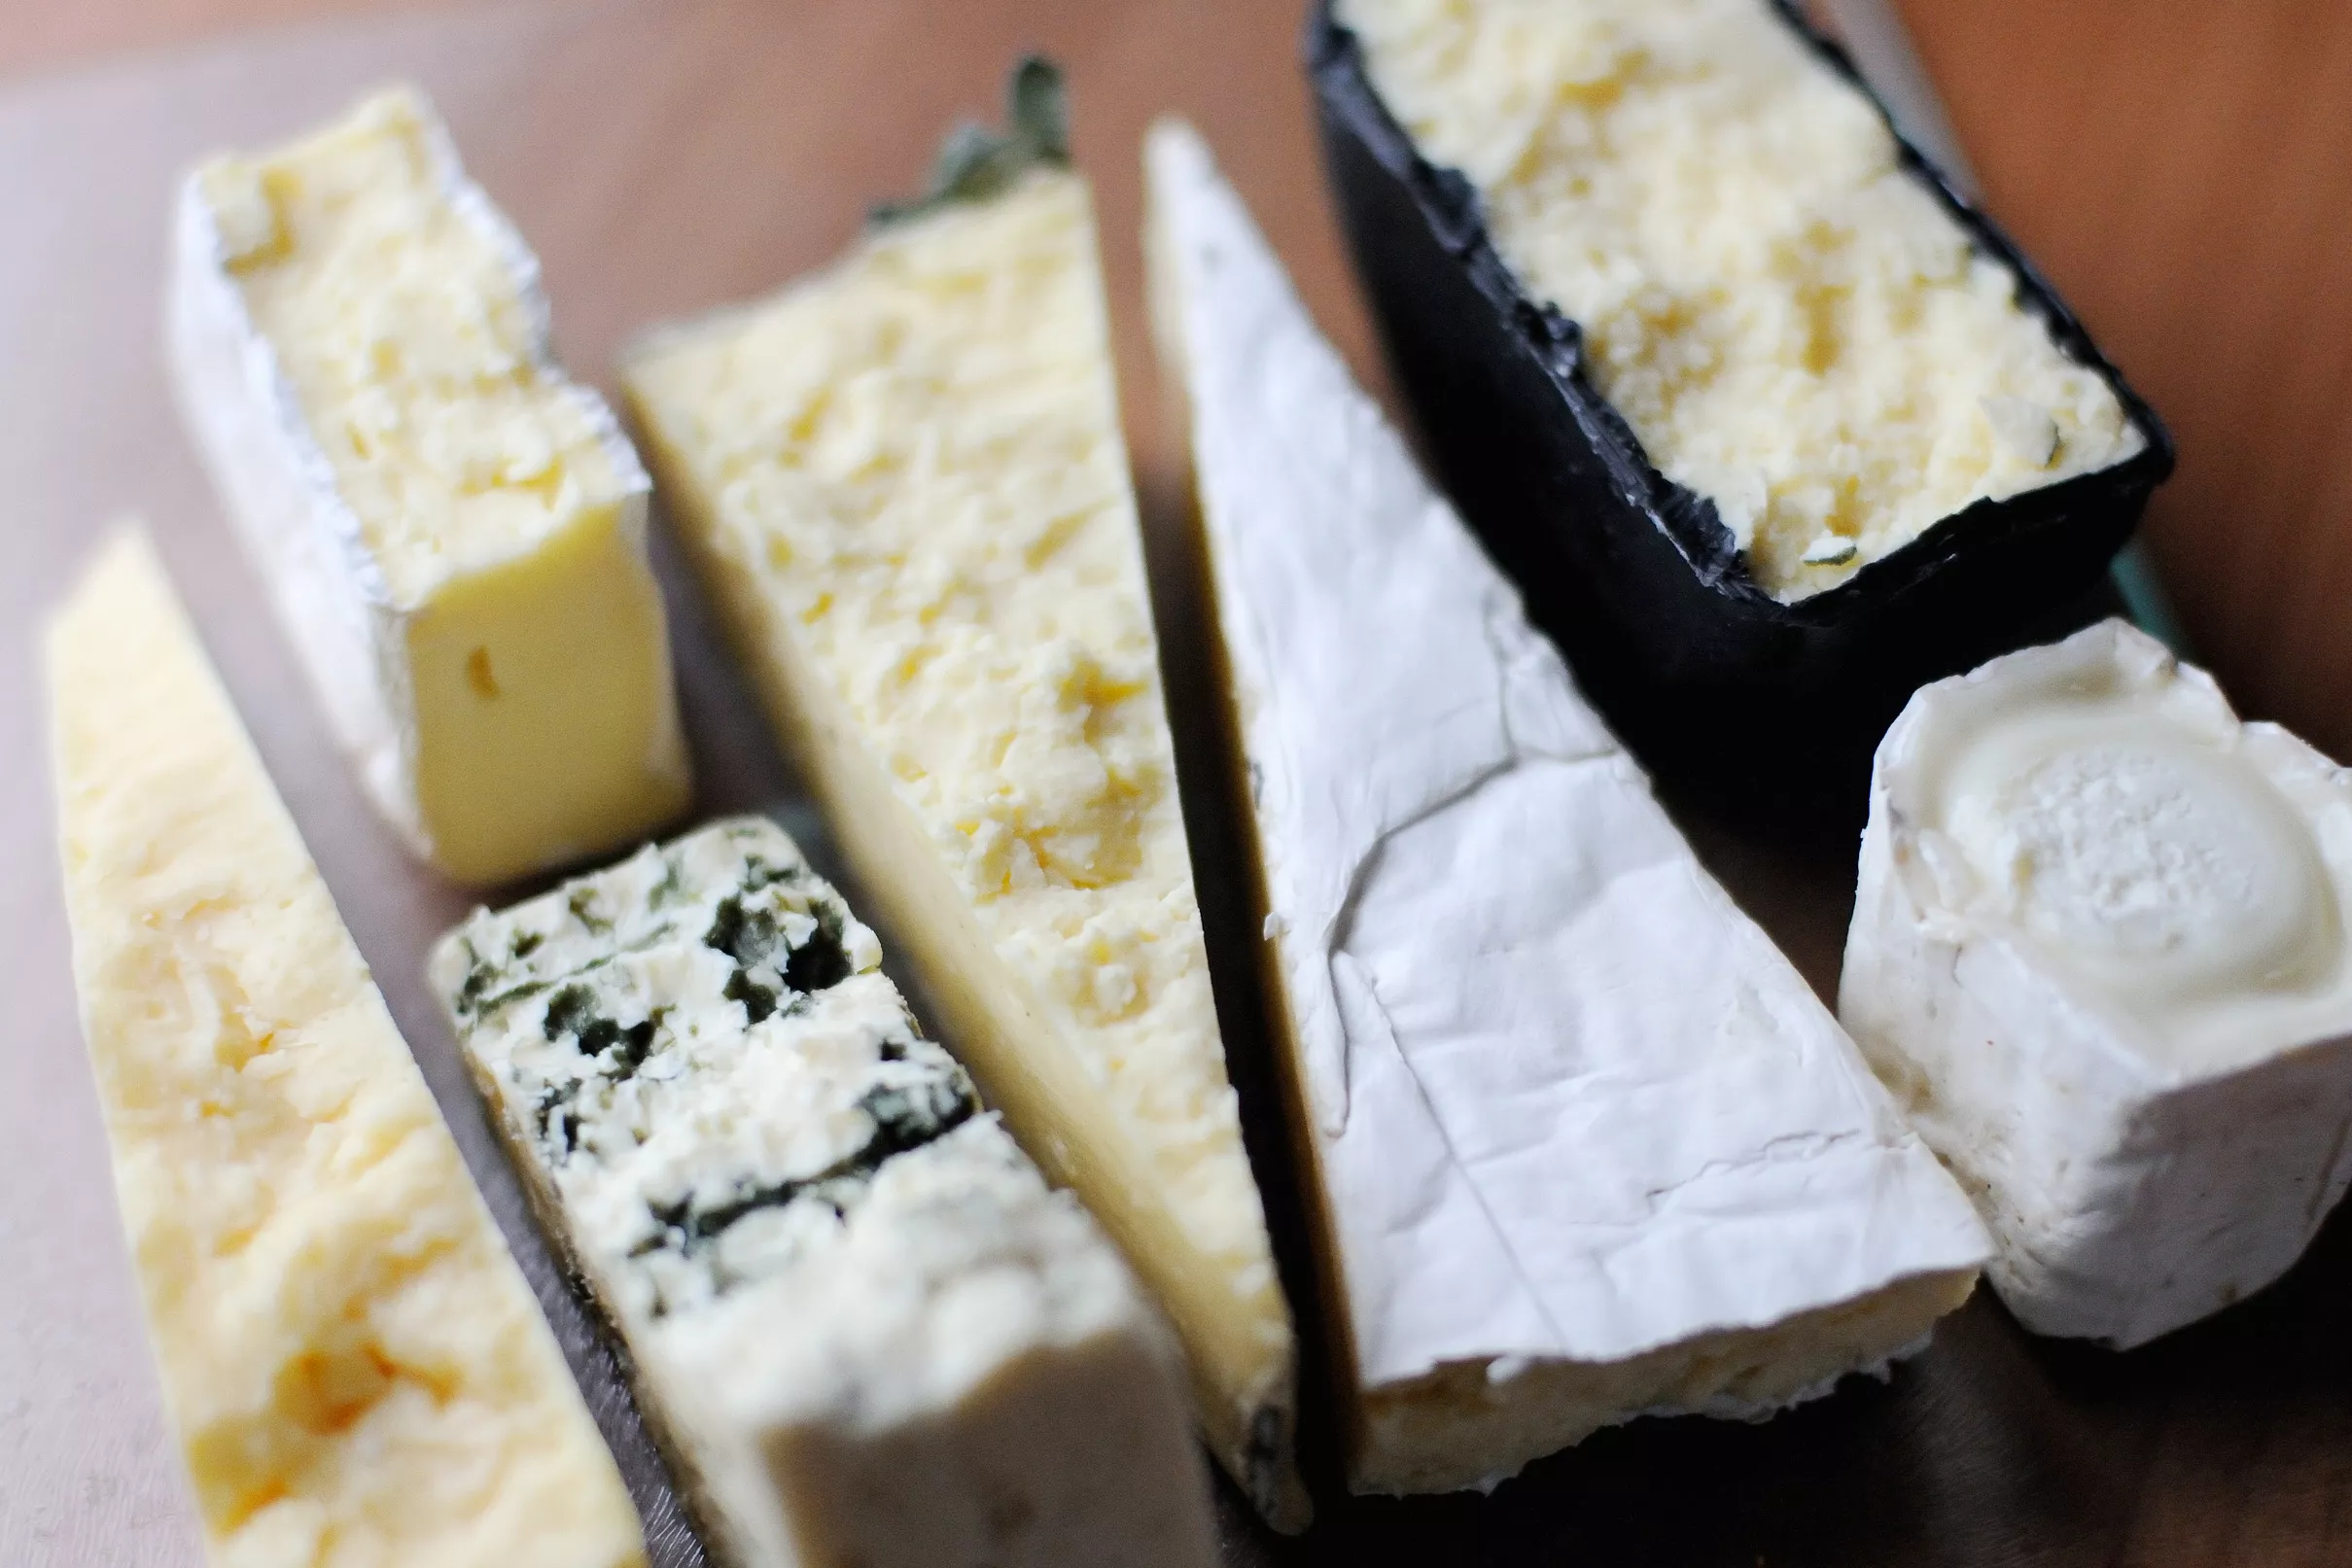 Ciaolatte in Italy, Europe | Cheesemakers - Rated 1